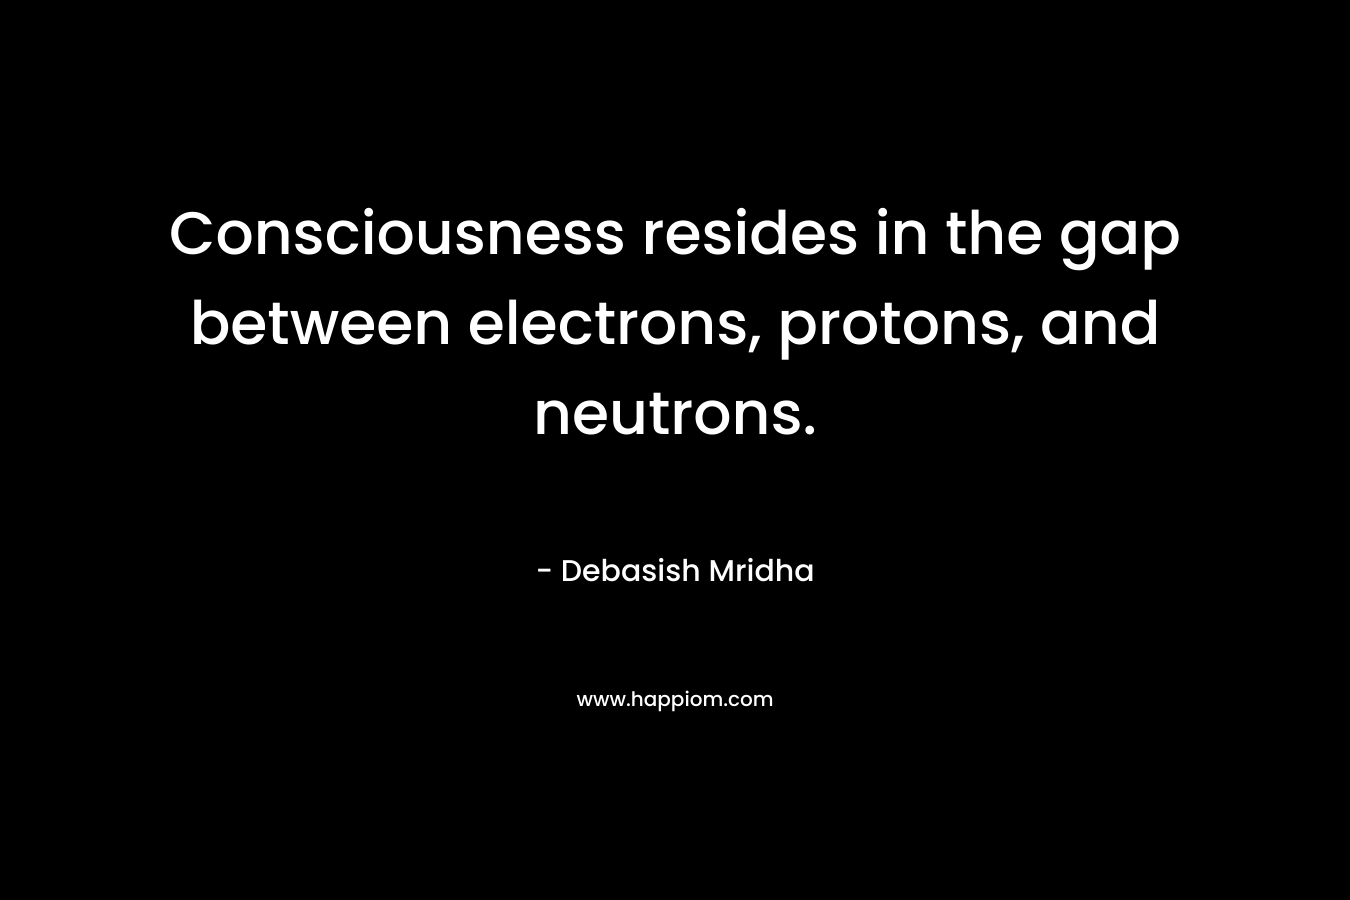 Consciousness resides in the gap between electrons, protons, and neutrons.